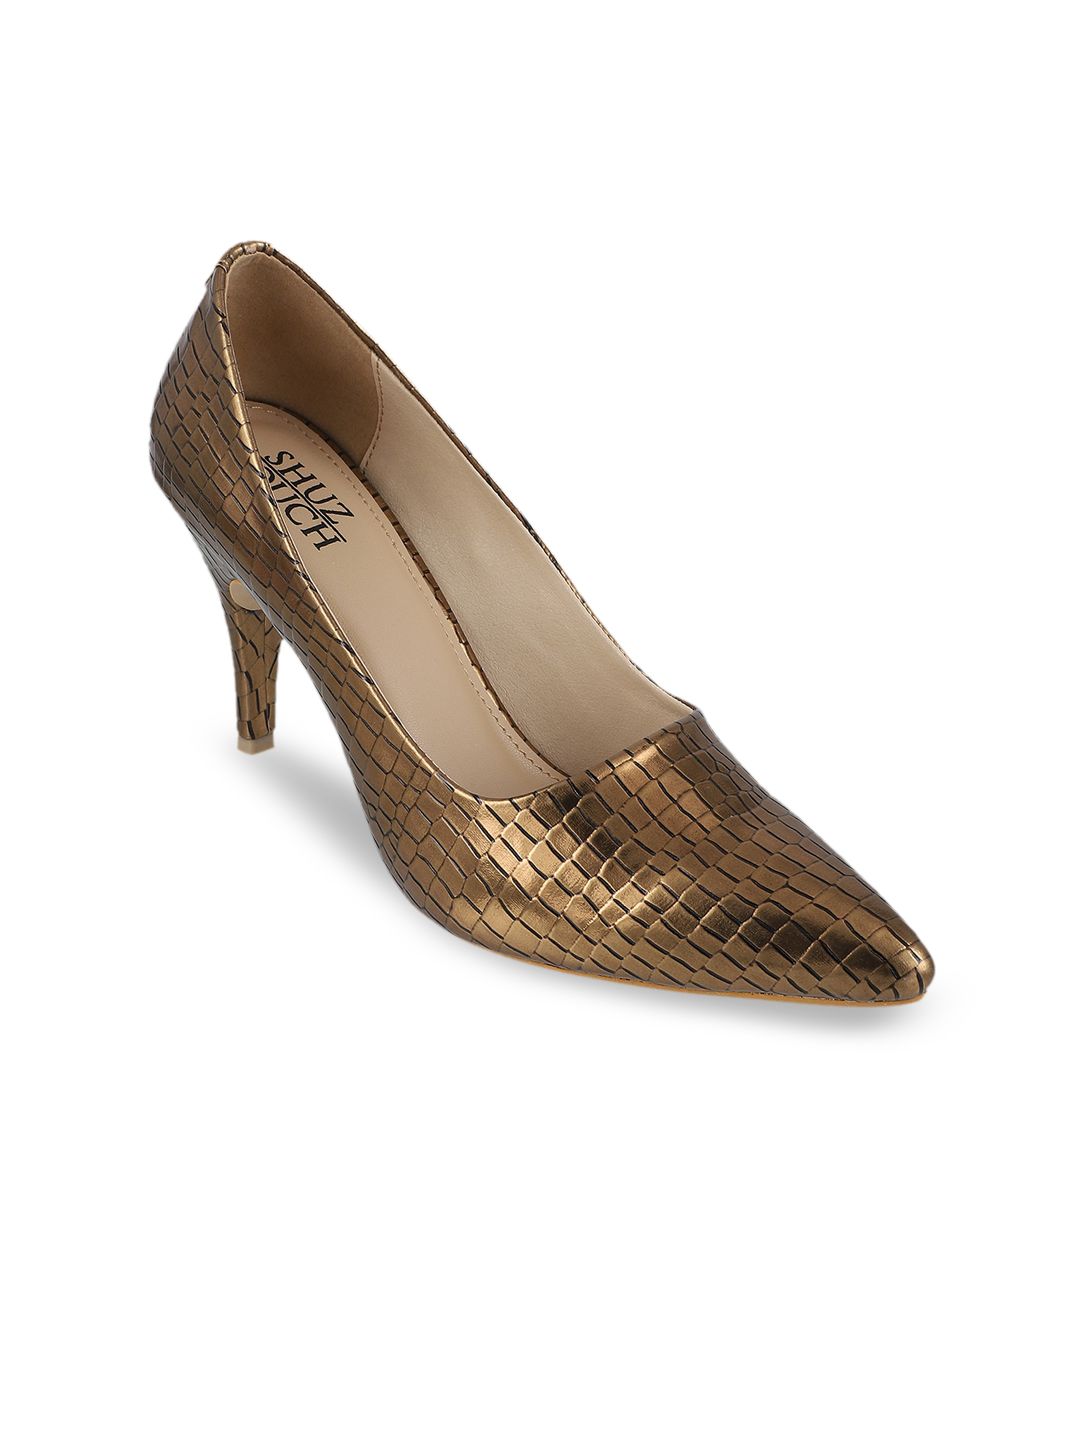 SHUZ TOUCH Copper-Toned Textured Party Pumps Price in India